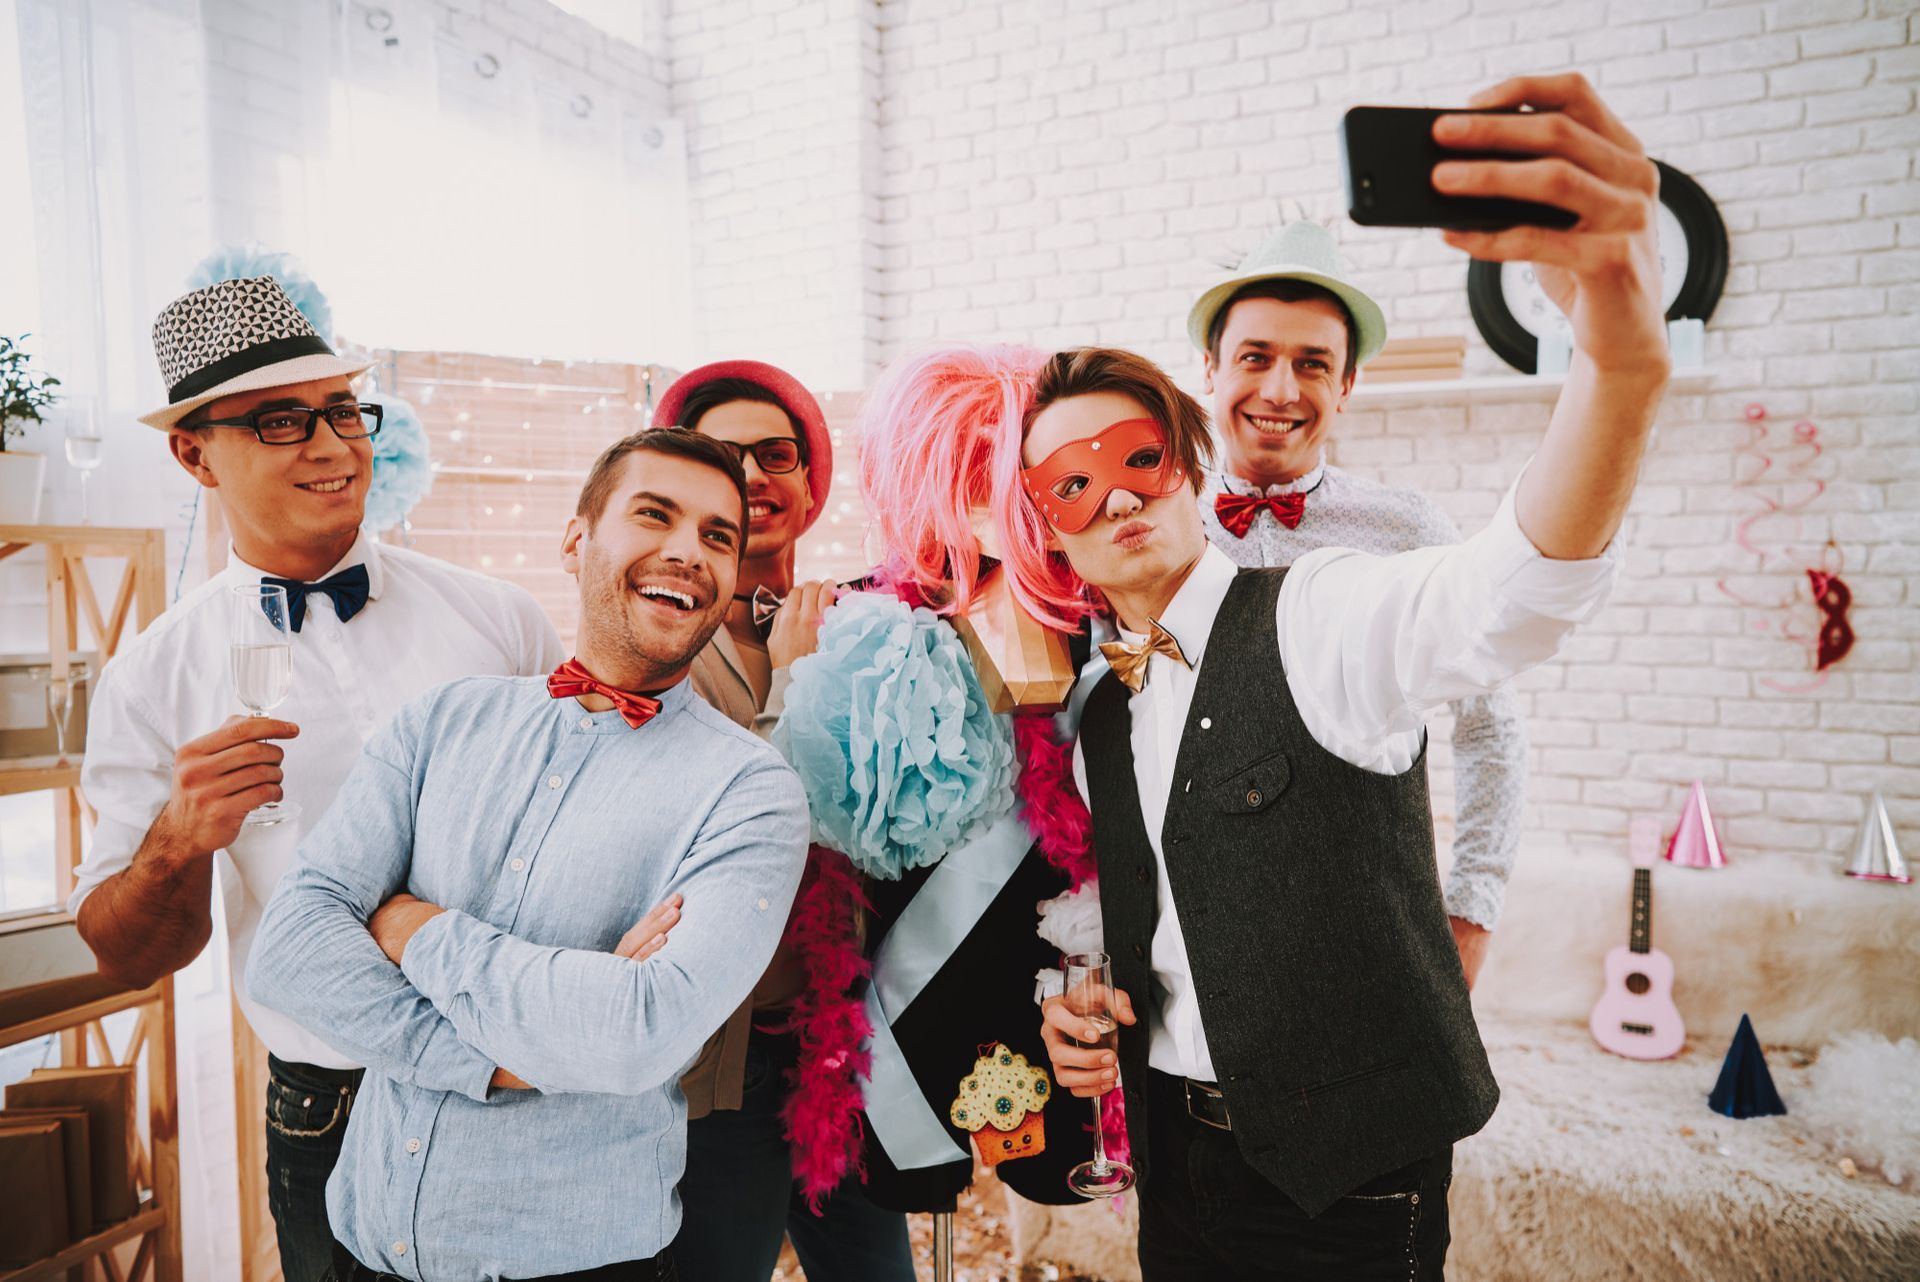 a group of people are taking a selfie together at a party .